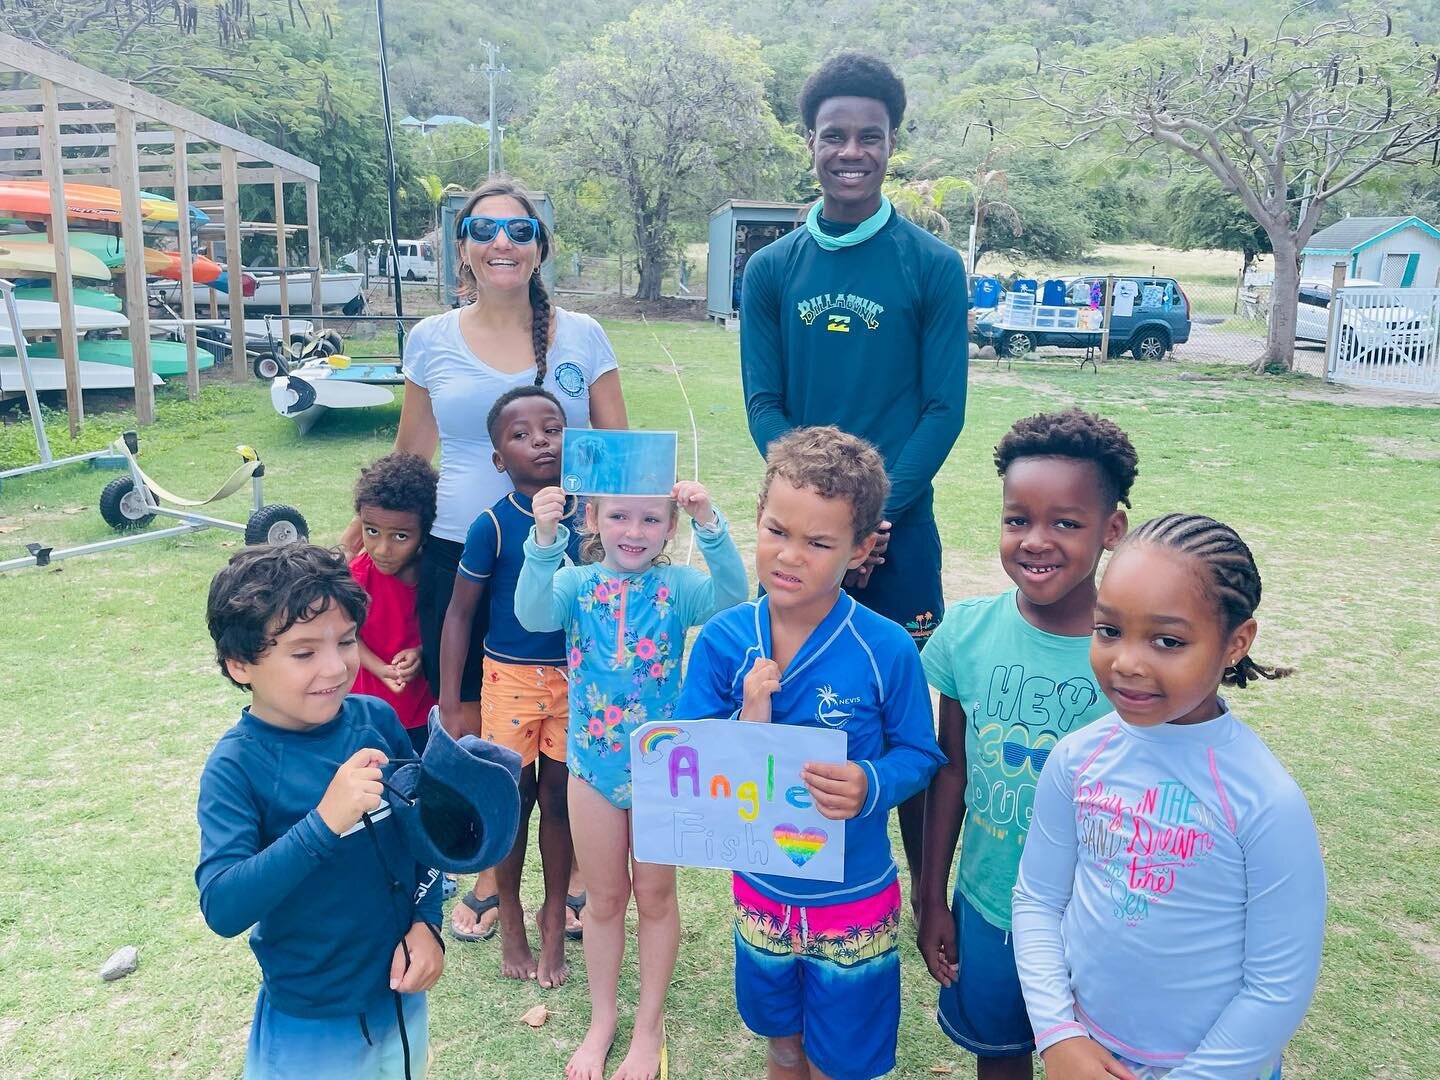 Easter Aquatic camp brings 40 kids to the Center for a full day of swimming, sailing and marine biology sessions! The campers are having a great time whilst developing their skills!